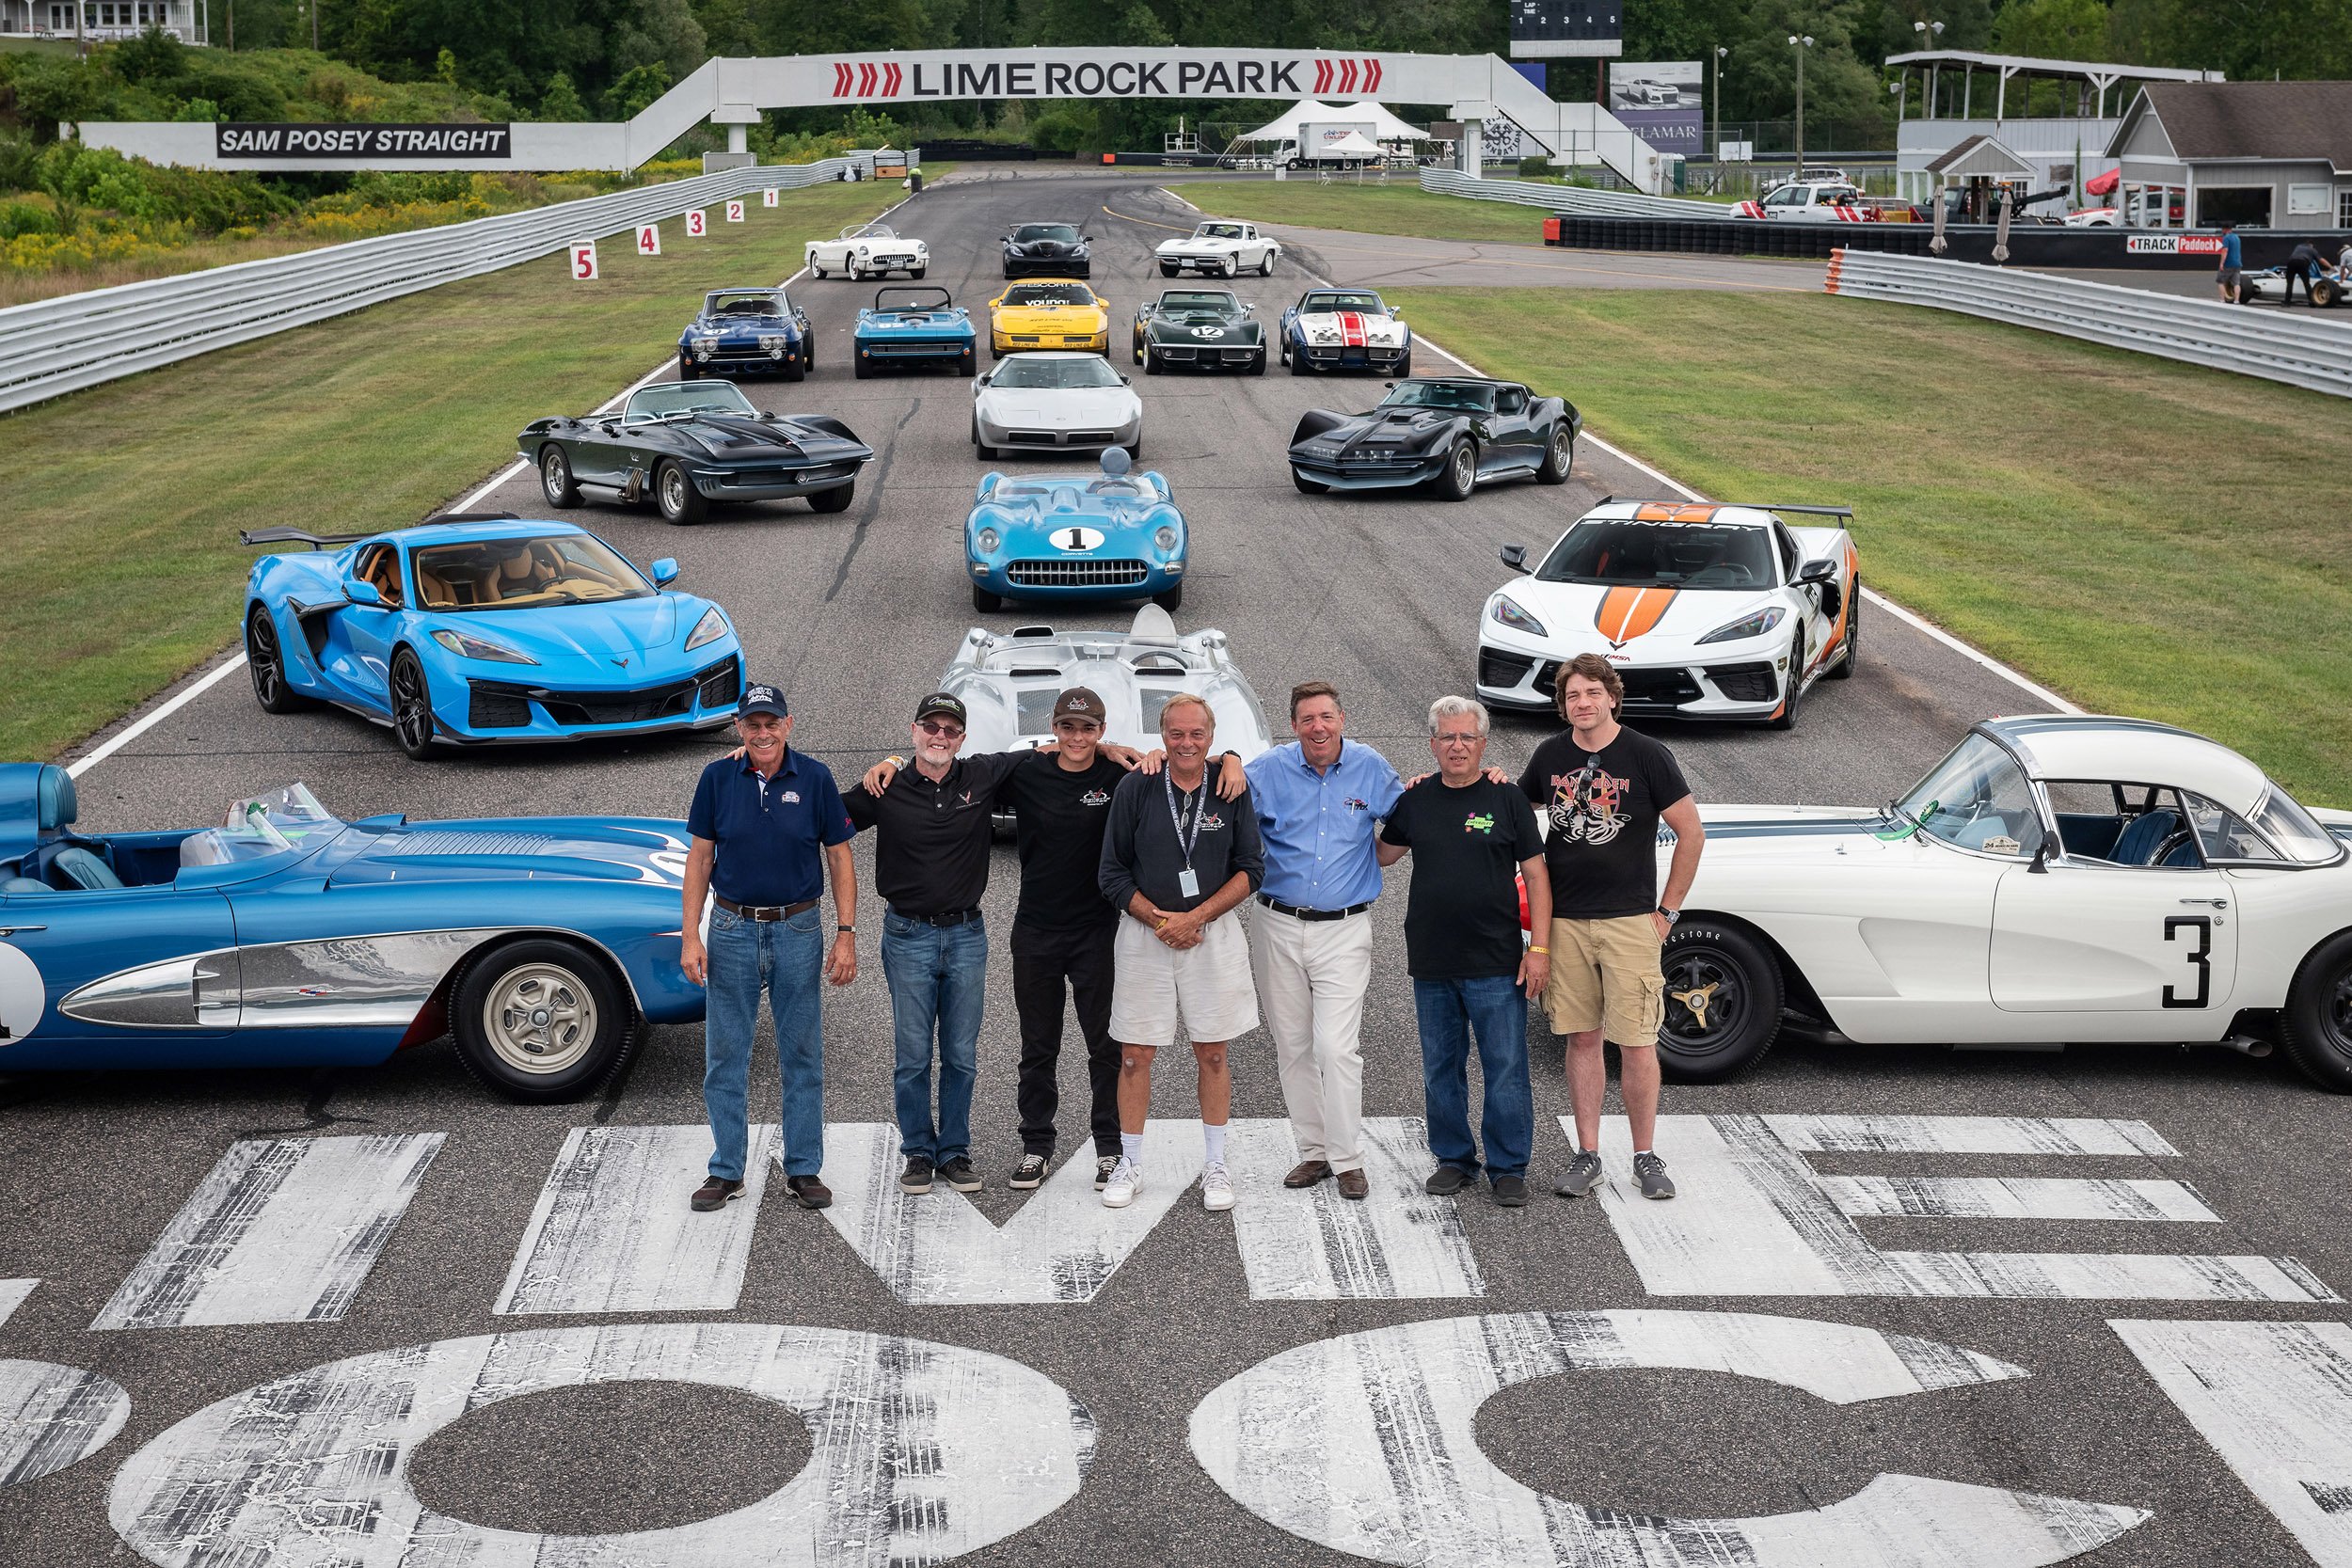 The Historic Festival Chairman, Lowell Paddock, with the Corvette team. 